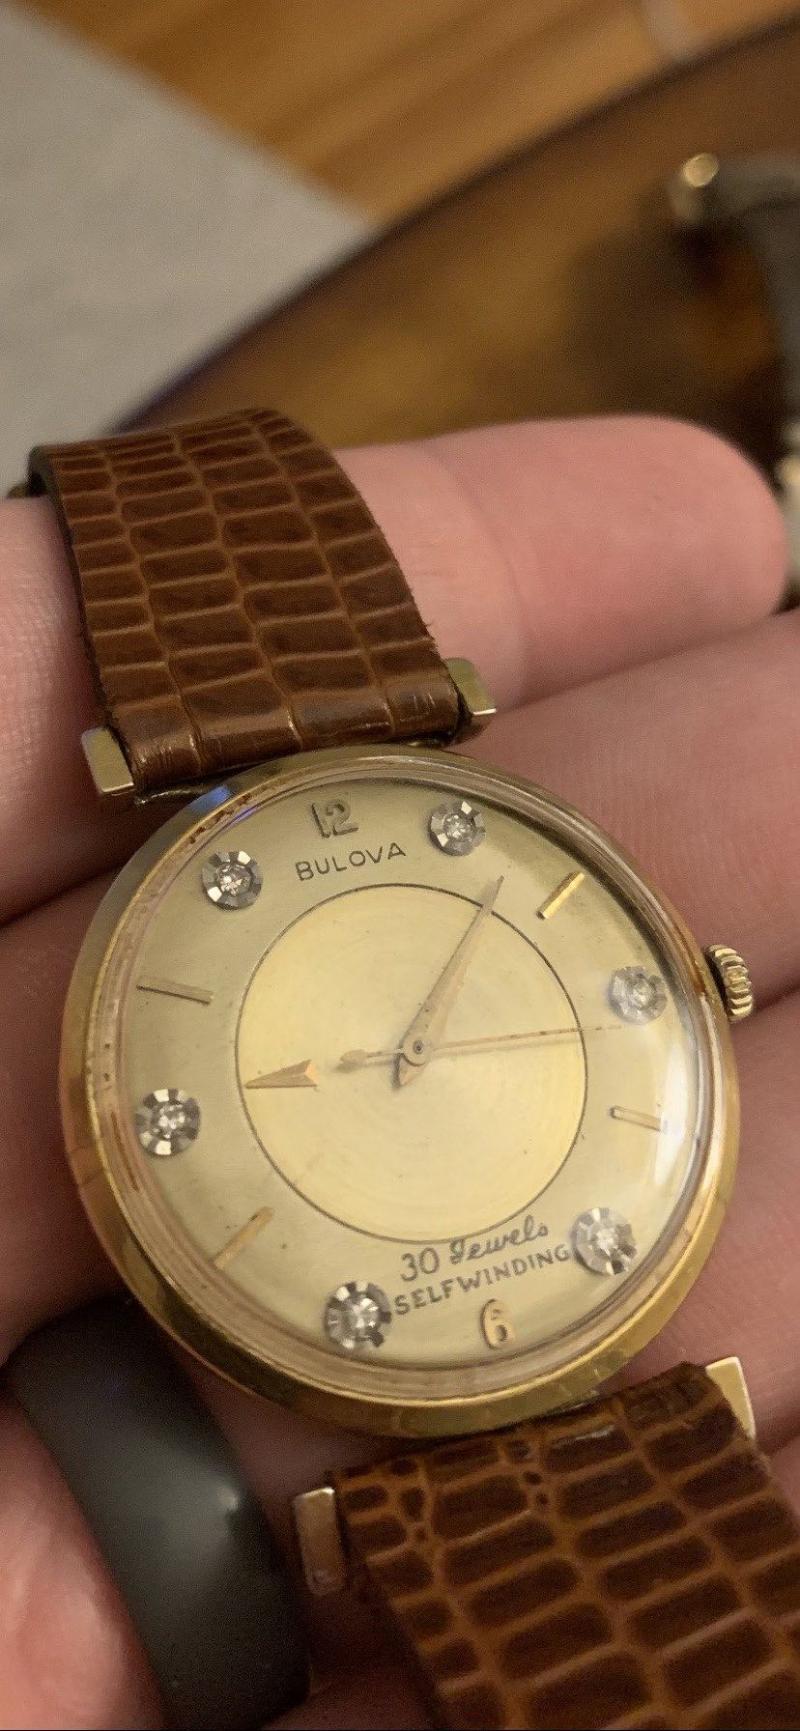 Mystery dial with diamonds